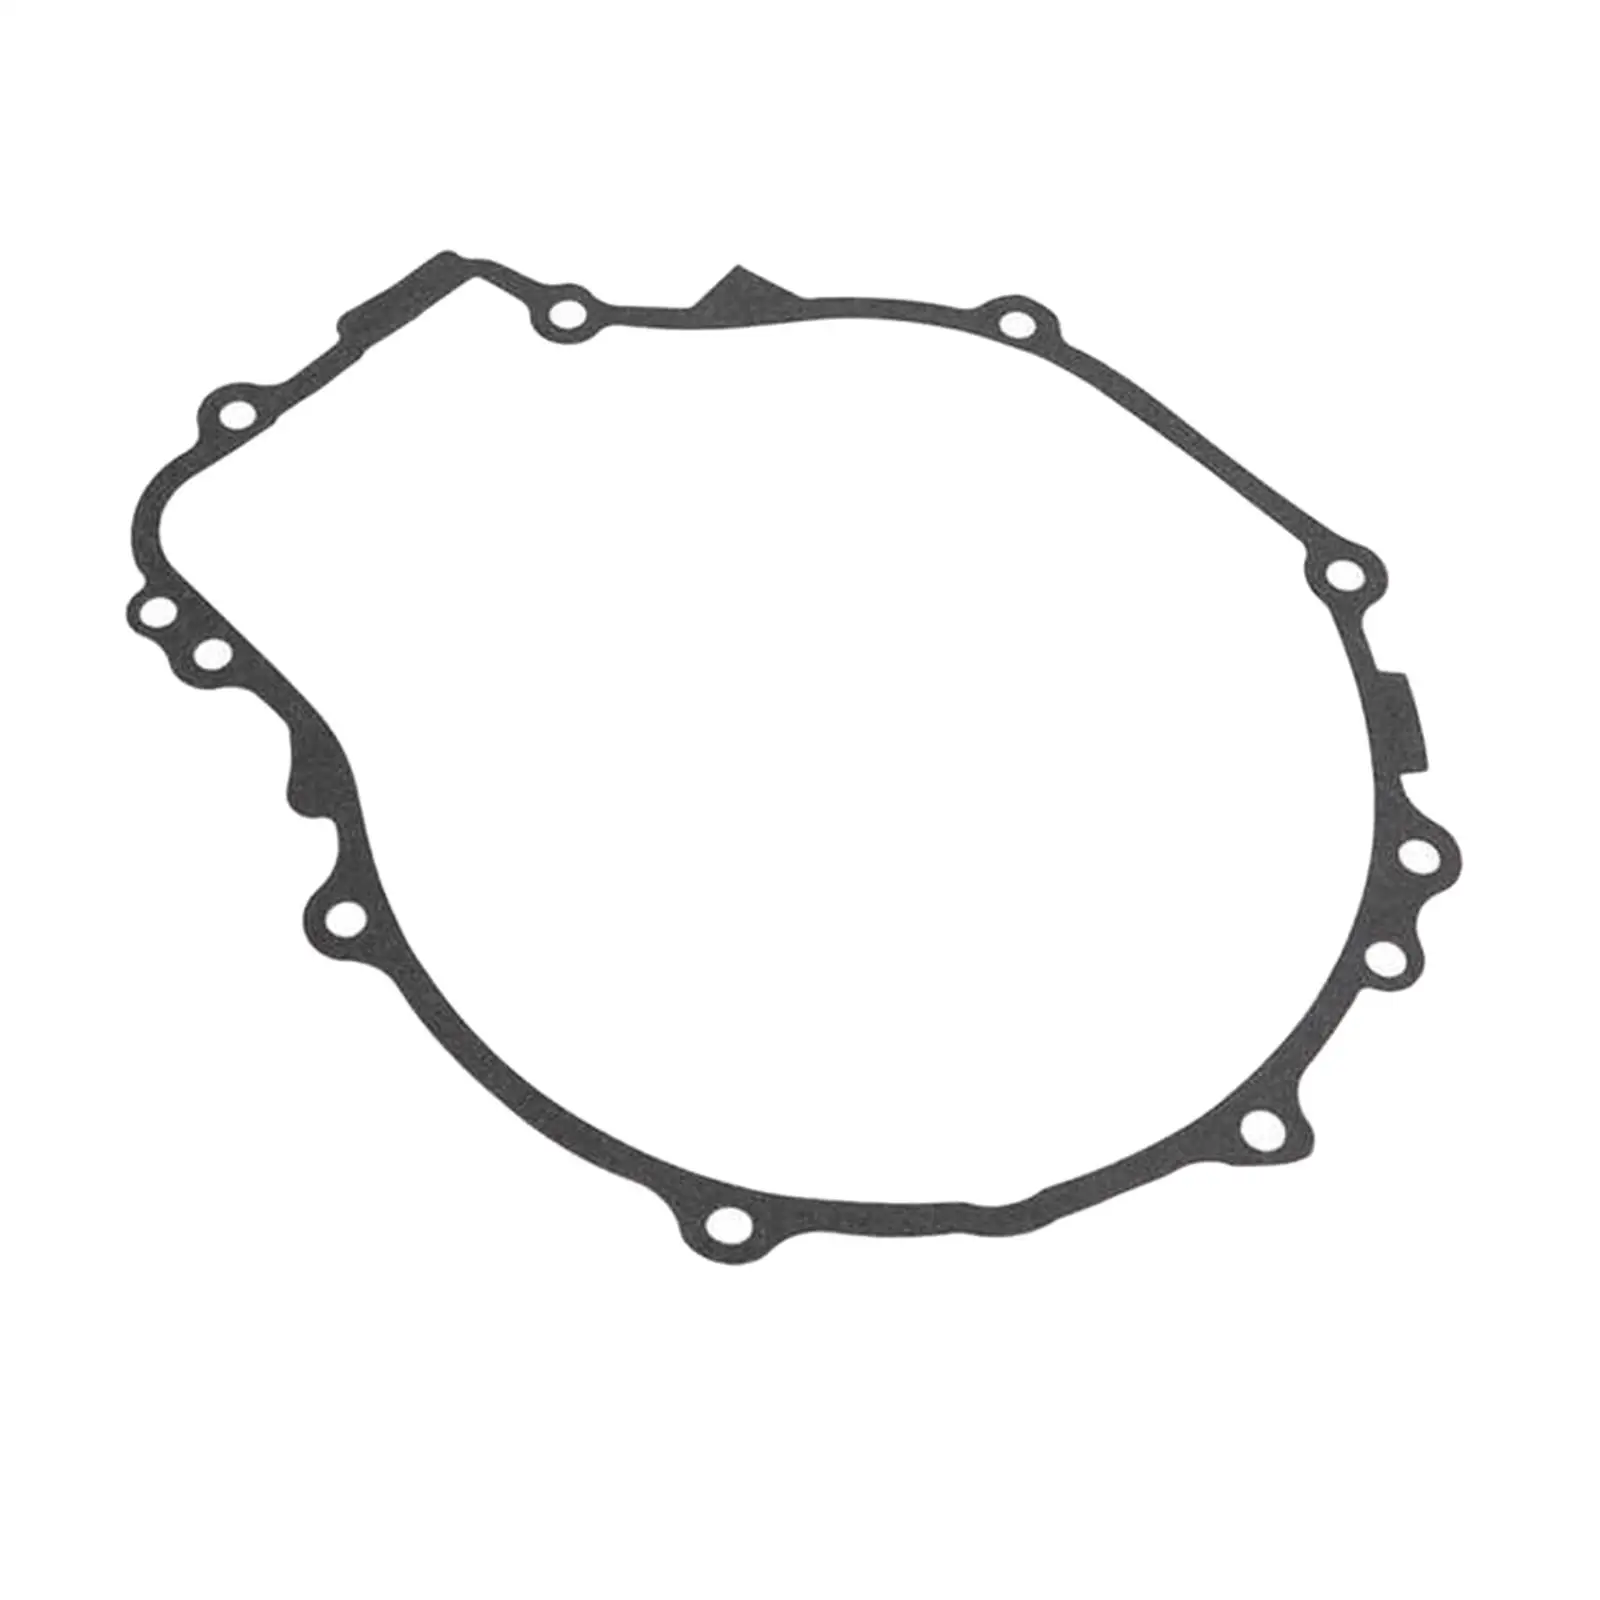 Automotive Pull Start Gasket 3084933 for Polaris Sportsman 500 1996?2011 Replacement Durable